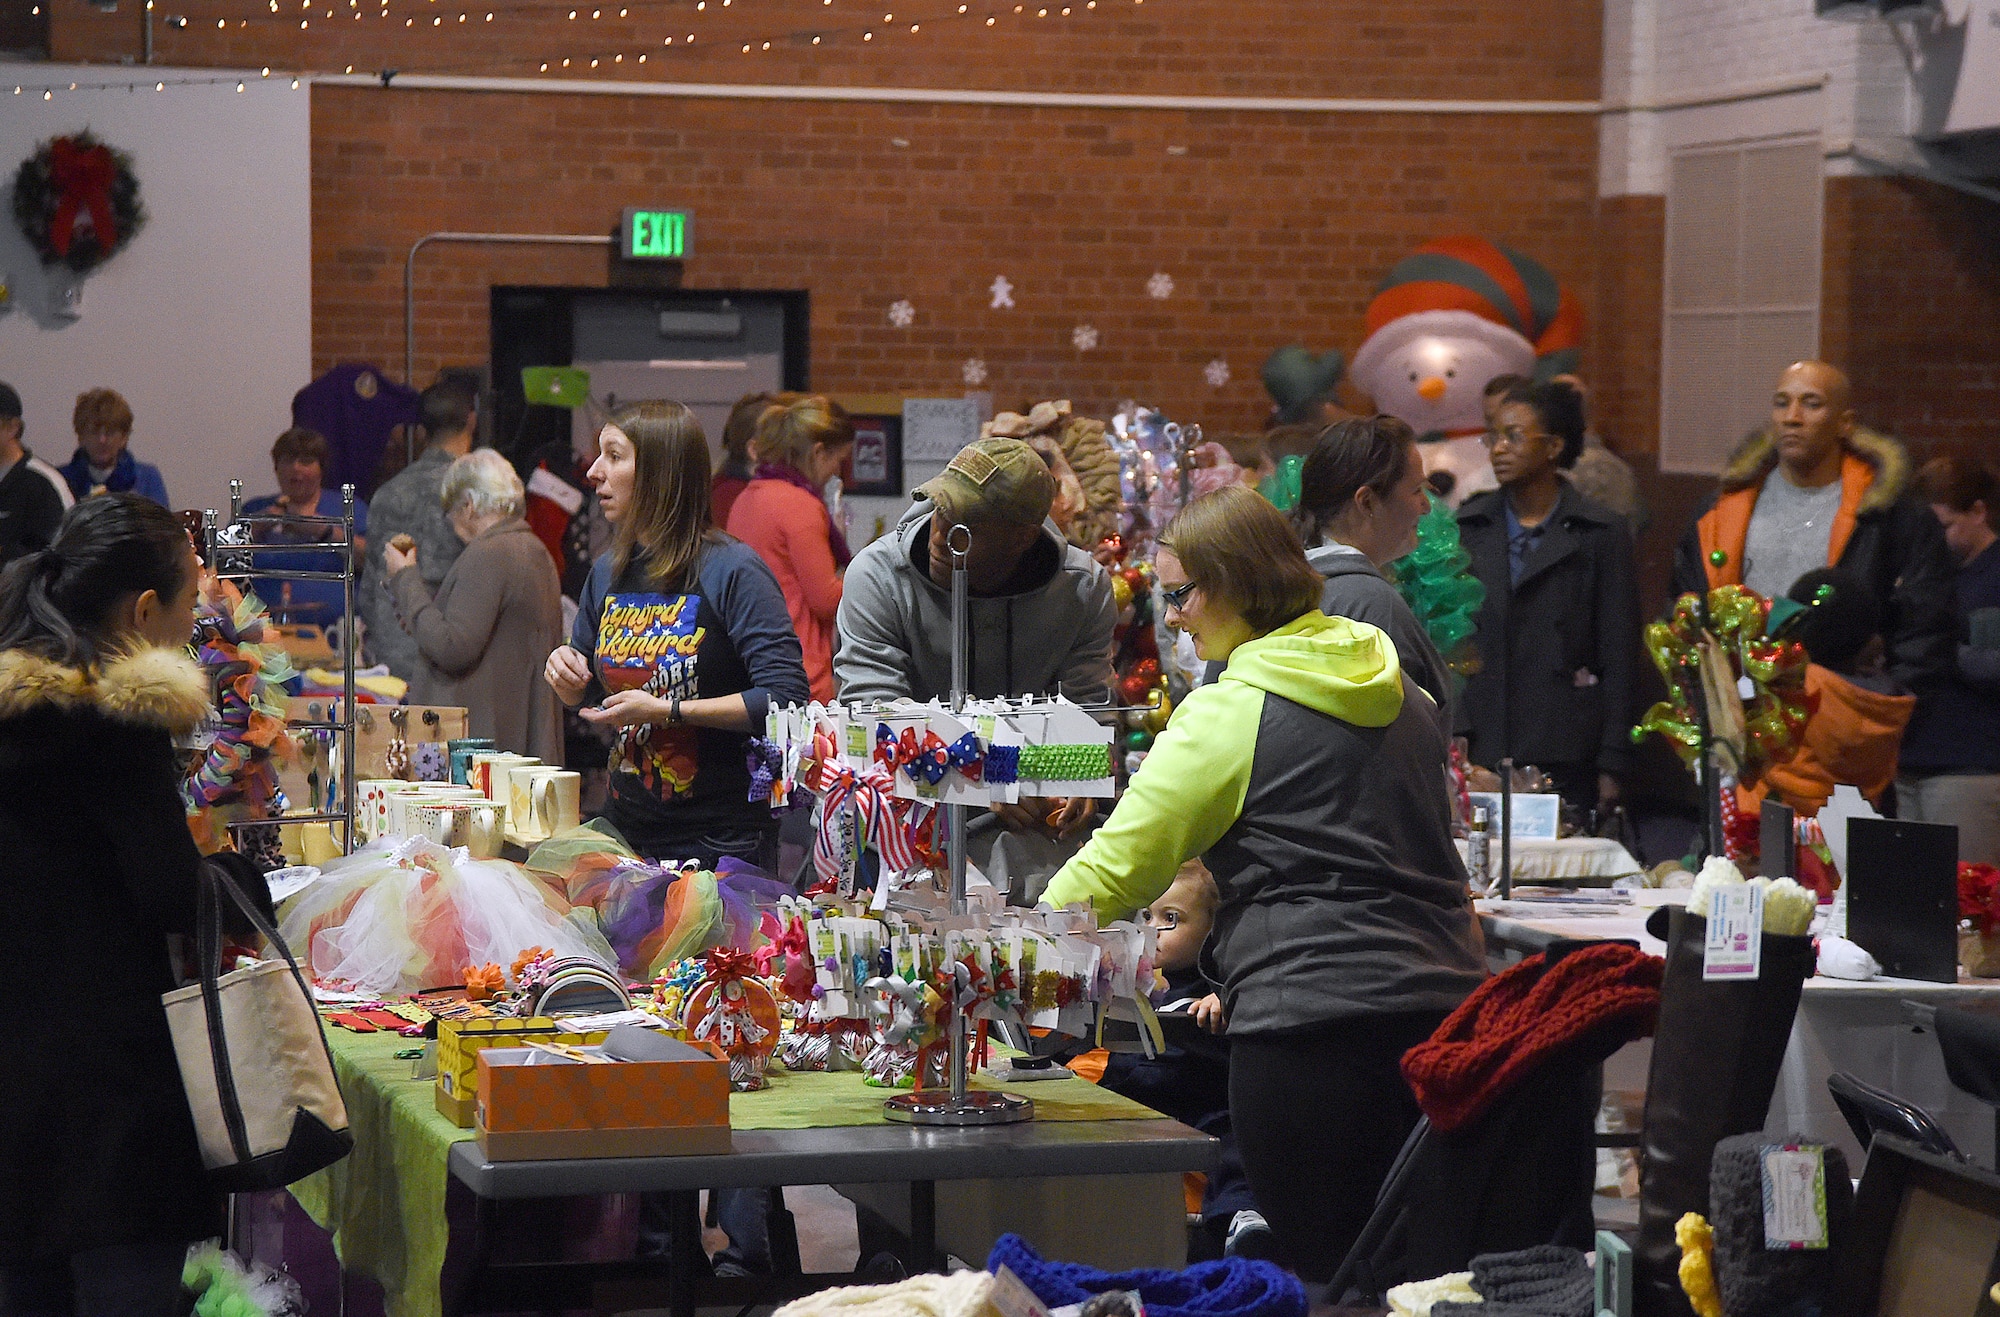 Airmen and family members stroll through stalls featuring crafts and baked goods in the Fall Hall Community Center on F.E. Warren Air Force Base, Wyo., Dec. 4, 2015. The opportunity to gift shop was part of the annual base tree lighting festivities. (U.S. Air Force photo by R.J. Oriez)